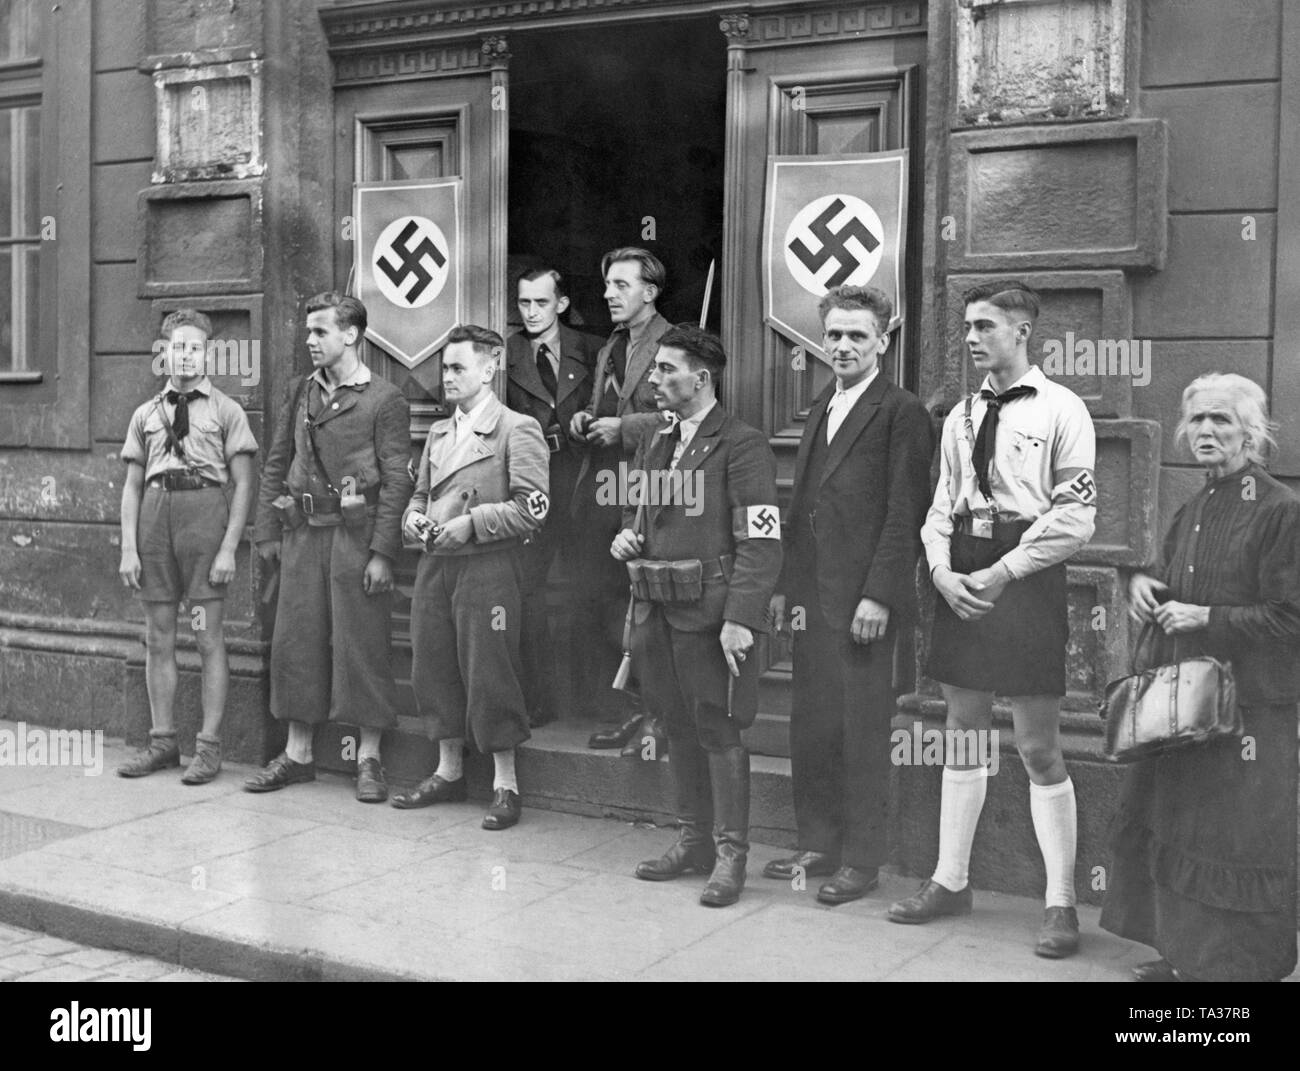 Sudeten German police in front of the police station. According to the Munich Agreement in October 1938, Czechoslovakia had to cede the Sudeten German territories to the German Reich. Stock Photo